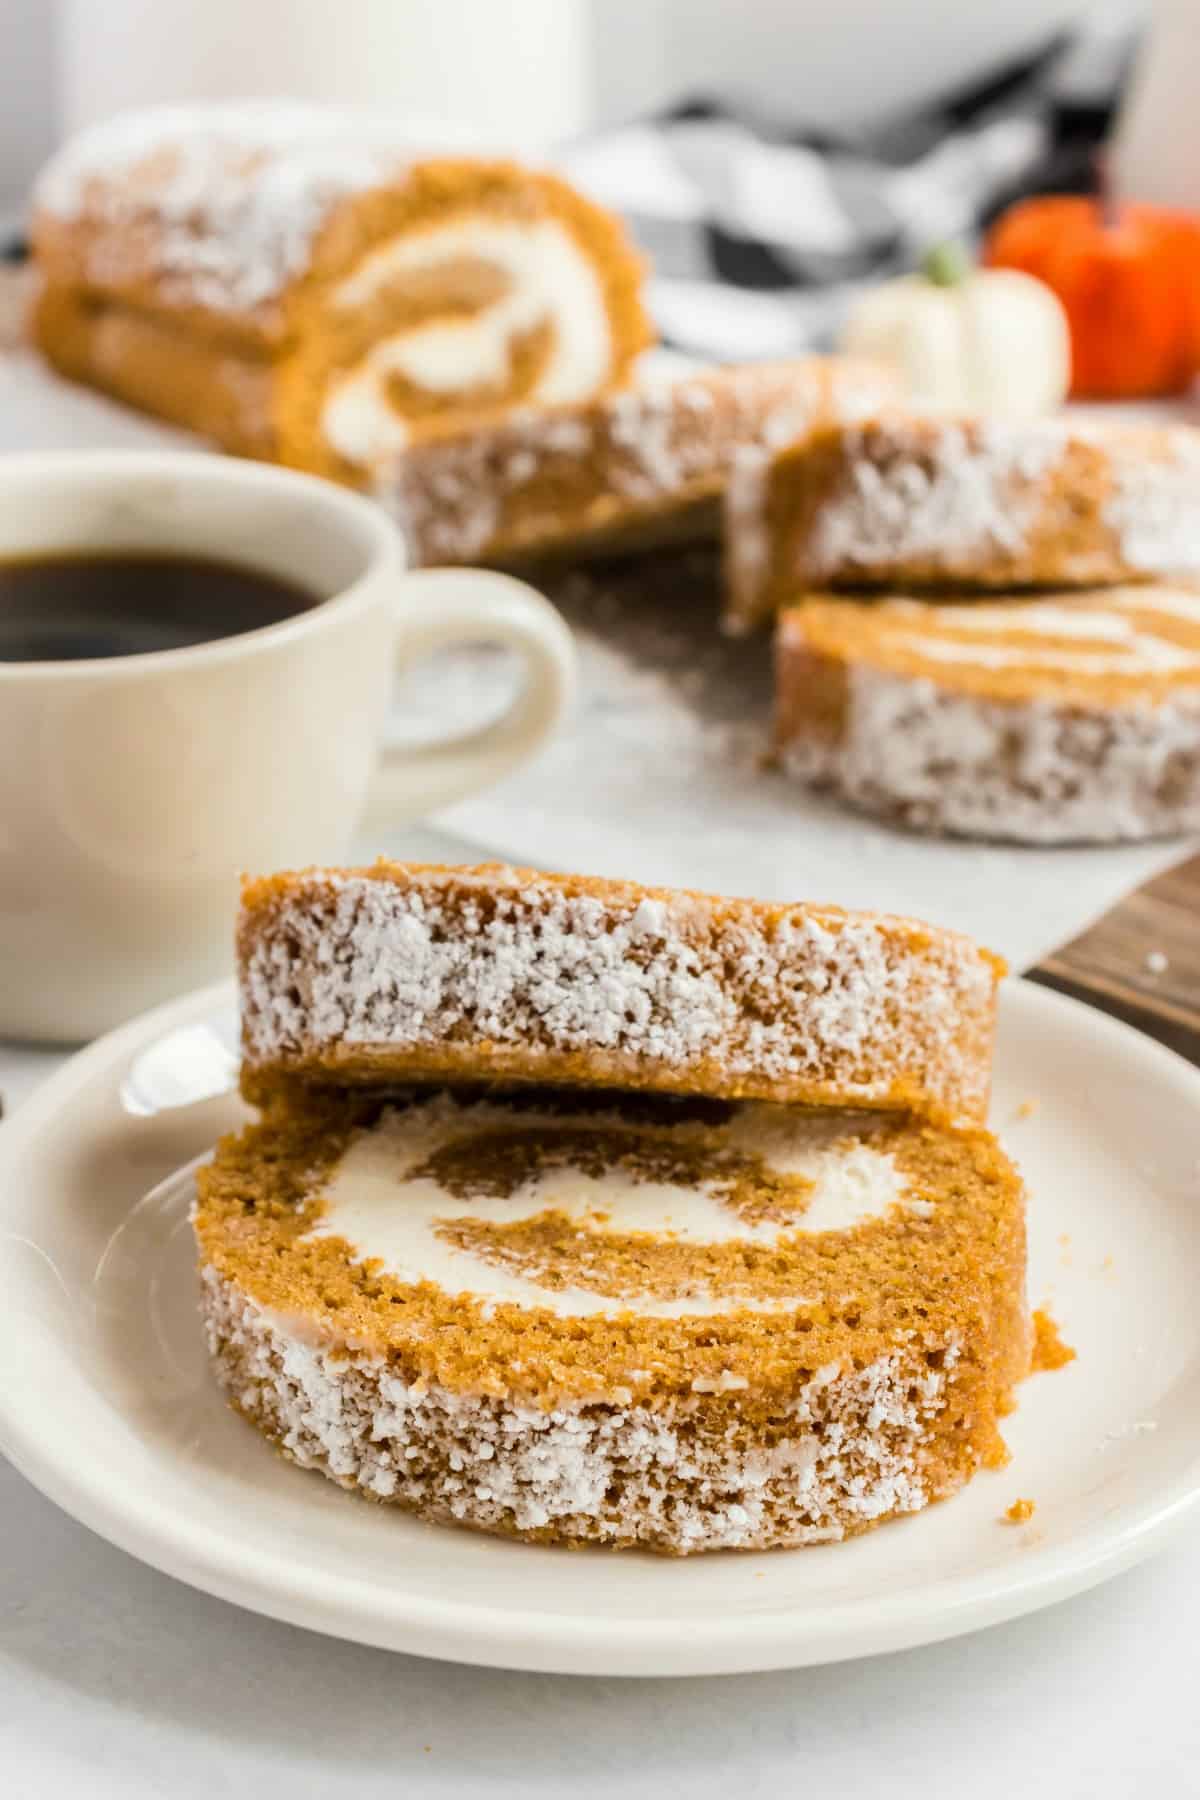 Two pumpkin roll slices on a white plate, with remaining cake in background.